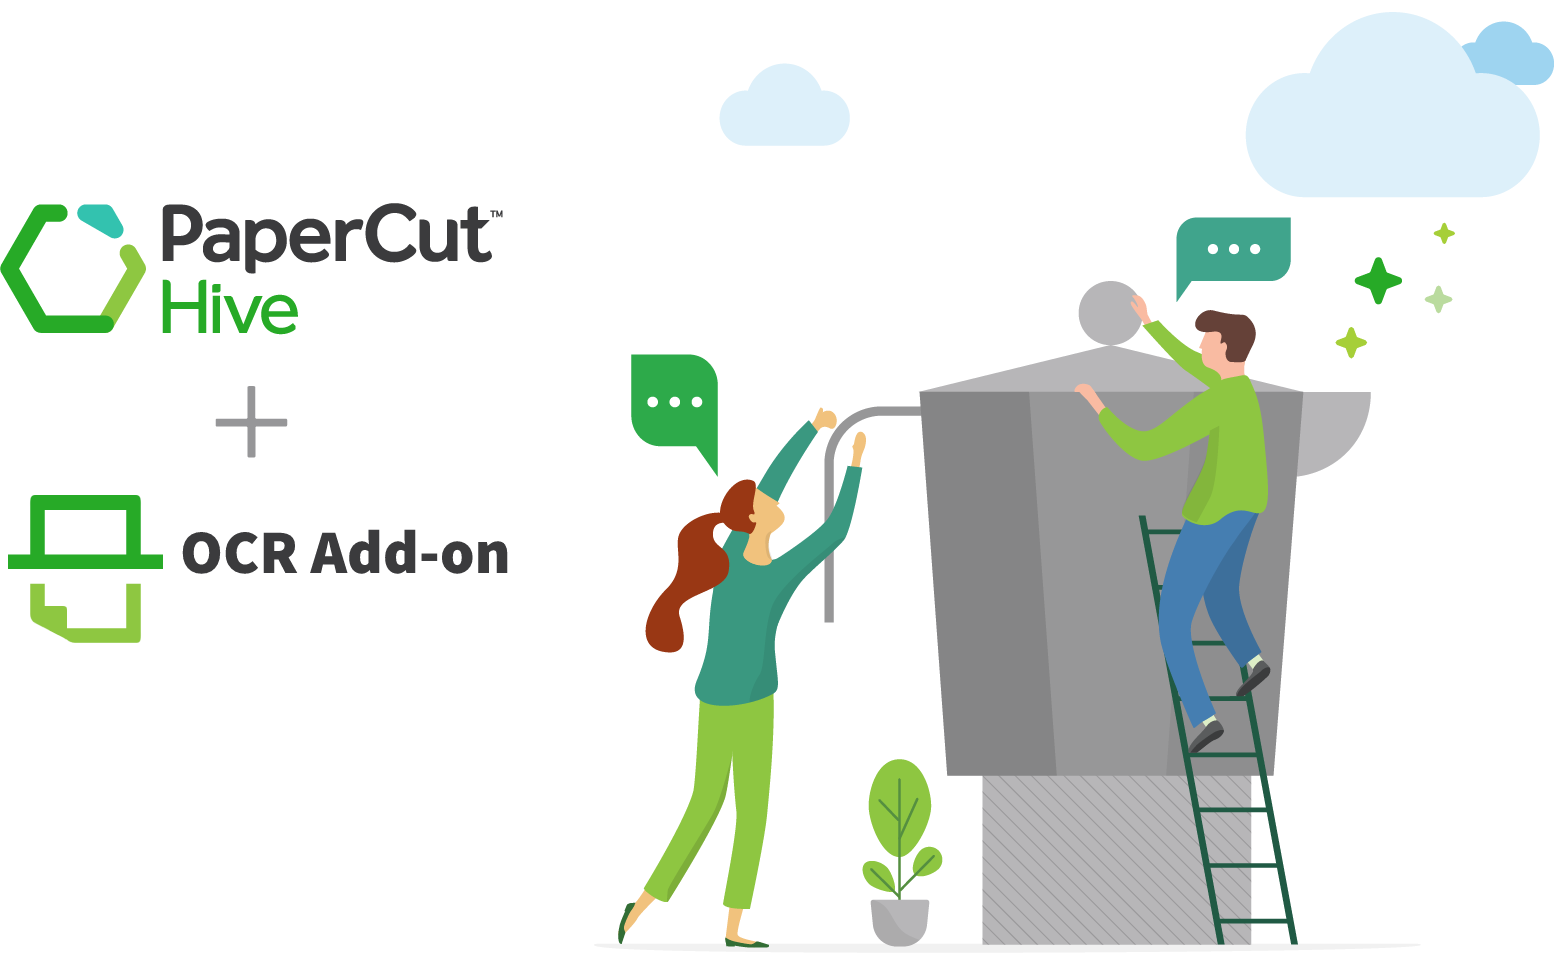 Two people on climbing a large coffee pot with a  ladder, with the papercut hive and ocr add-on logos